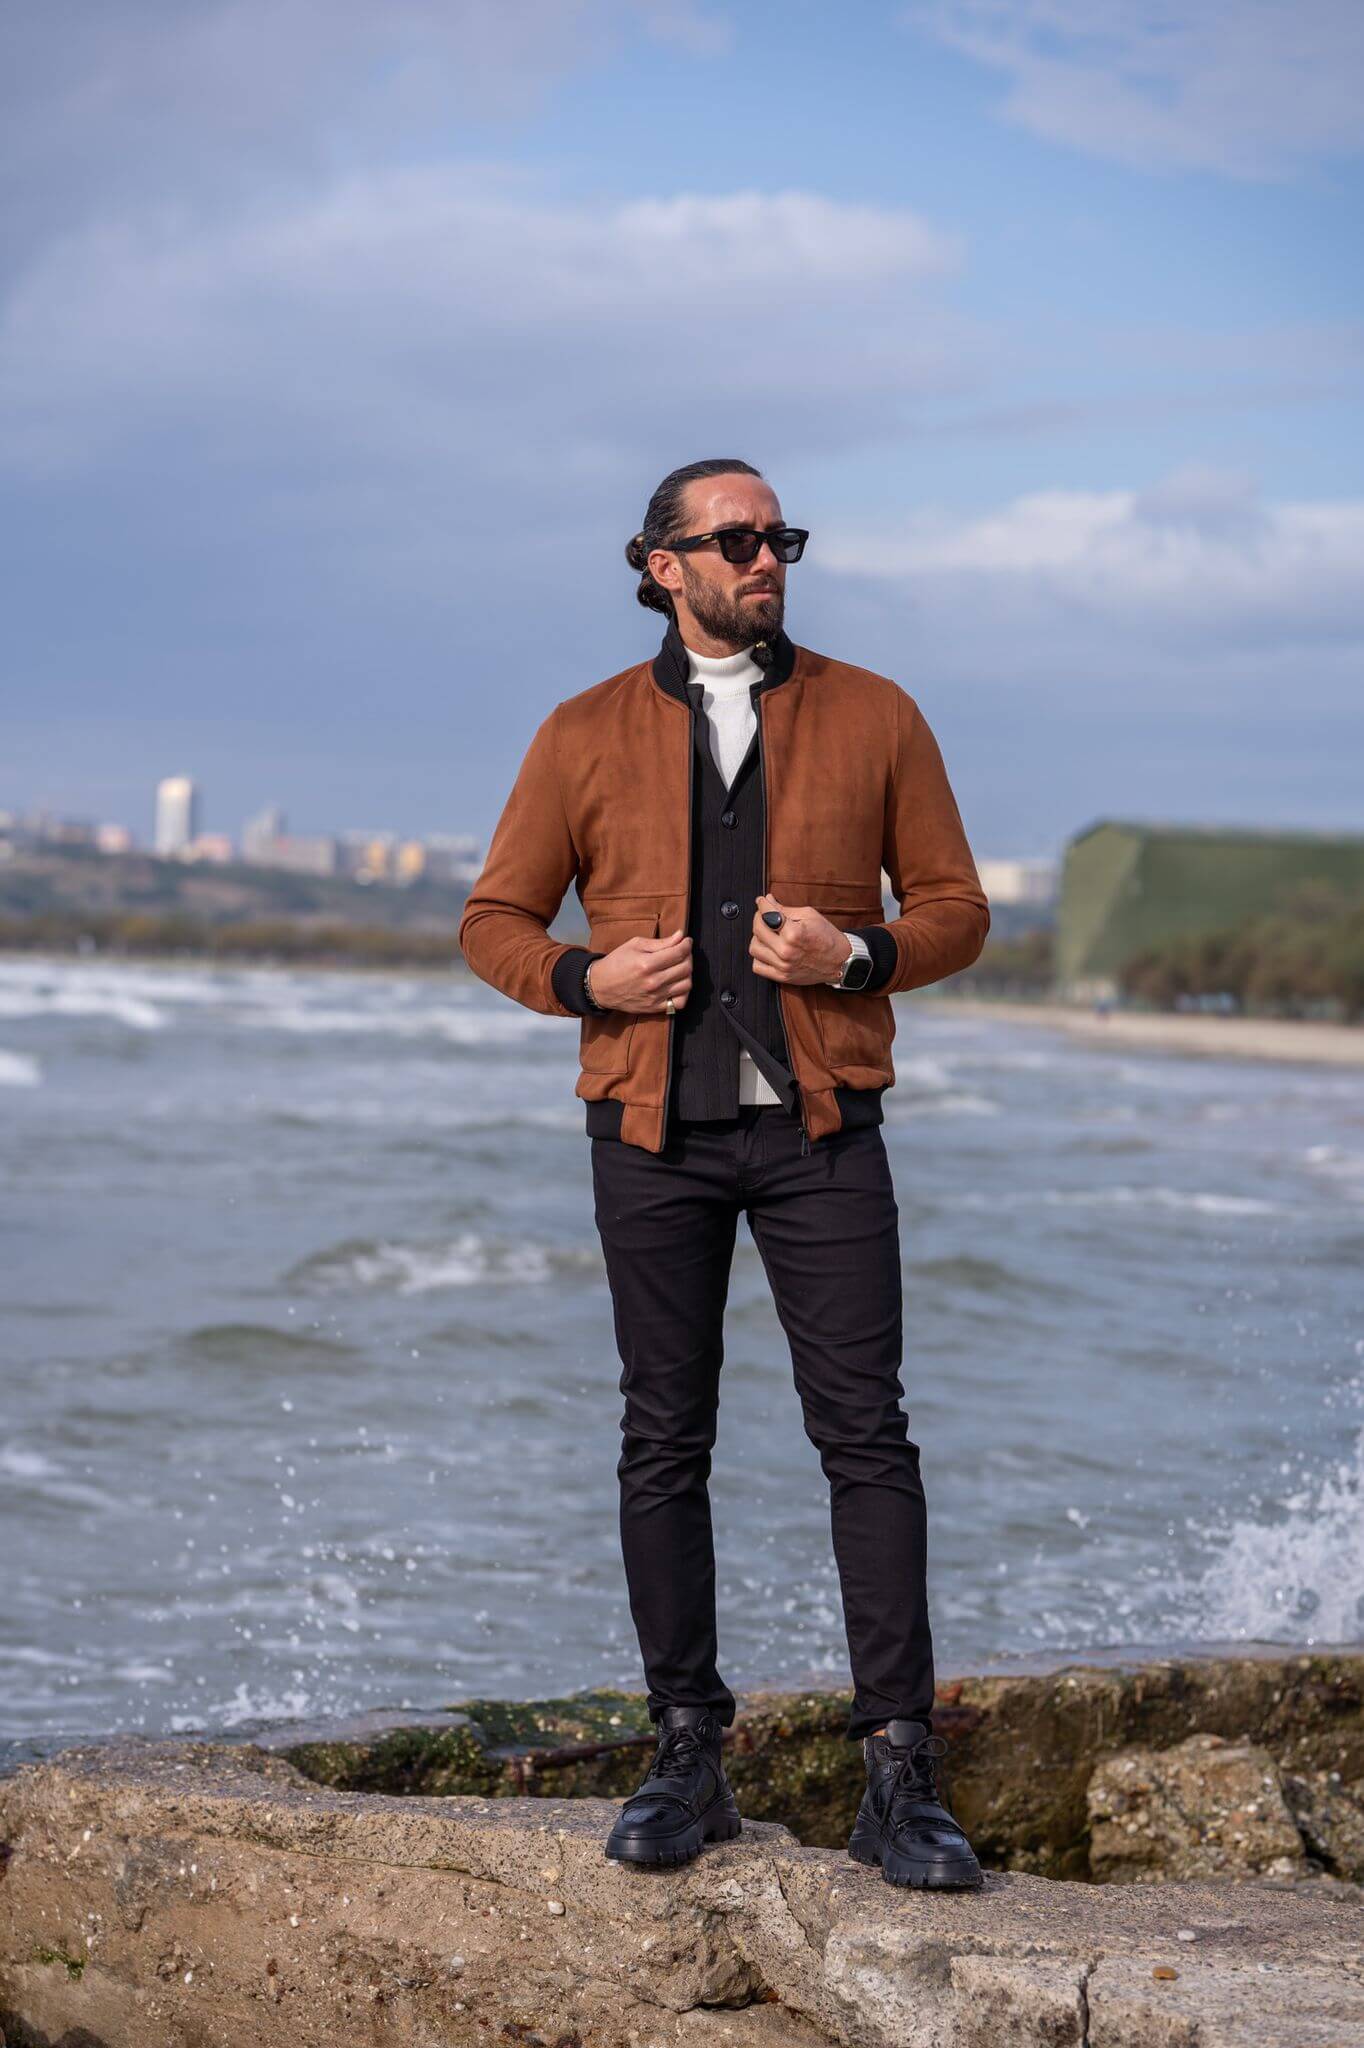 Capture the essence of modern fashion with our male model flaunting a sleek camel bomber jacket.